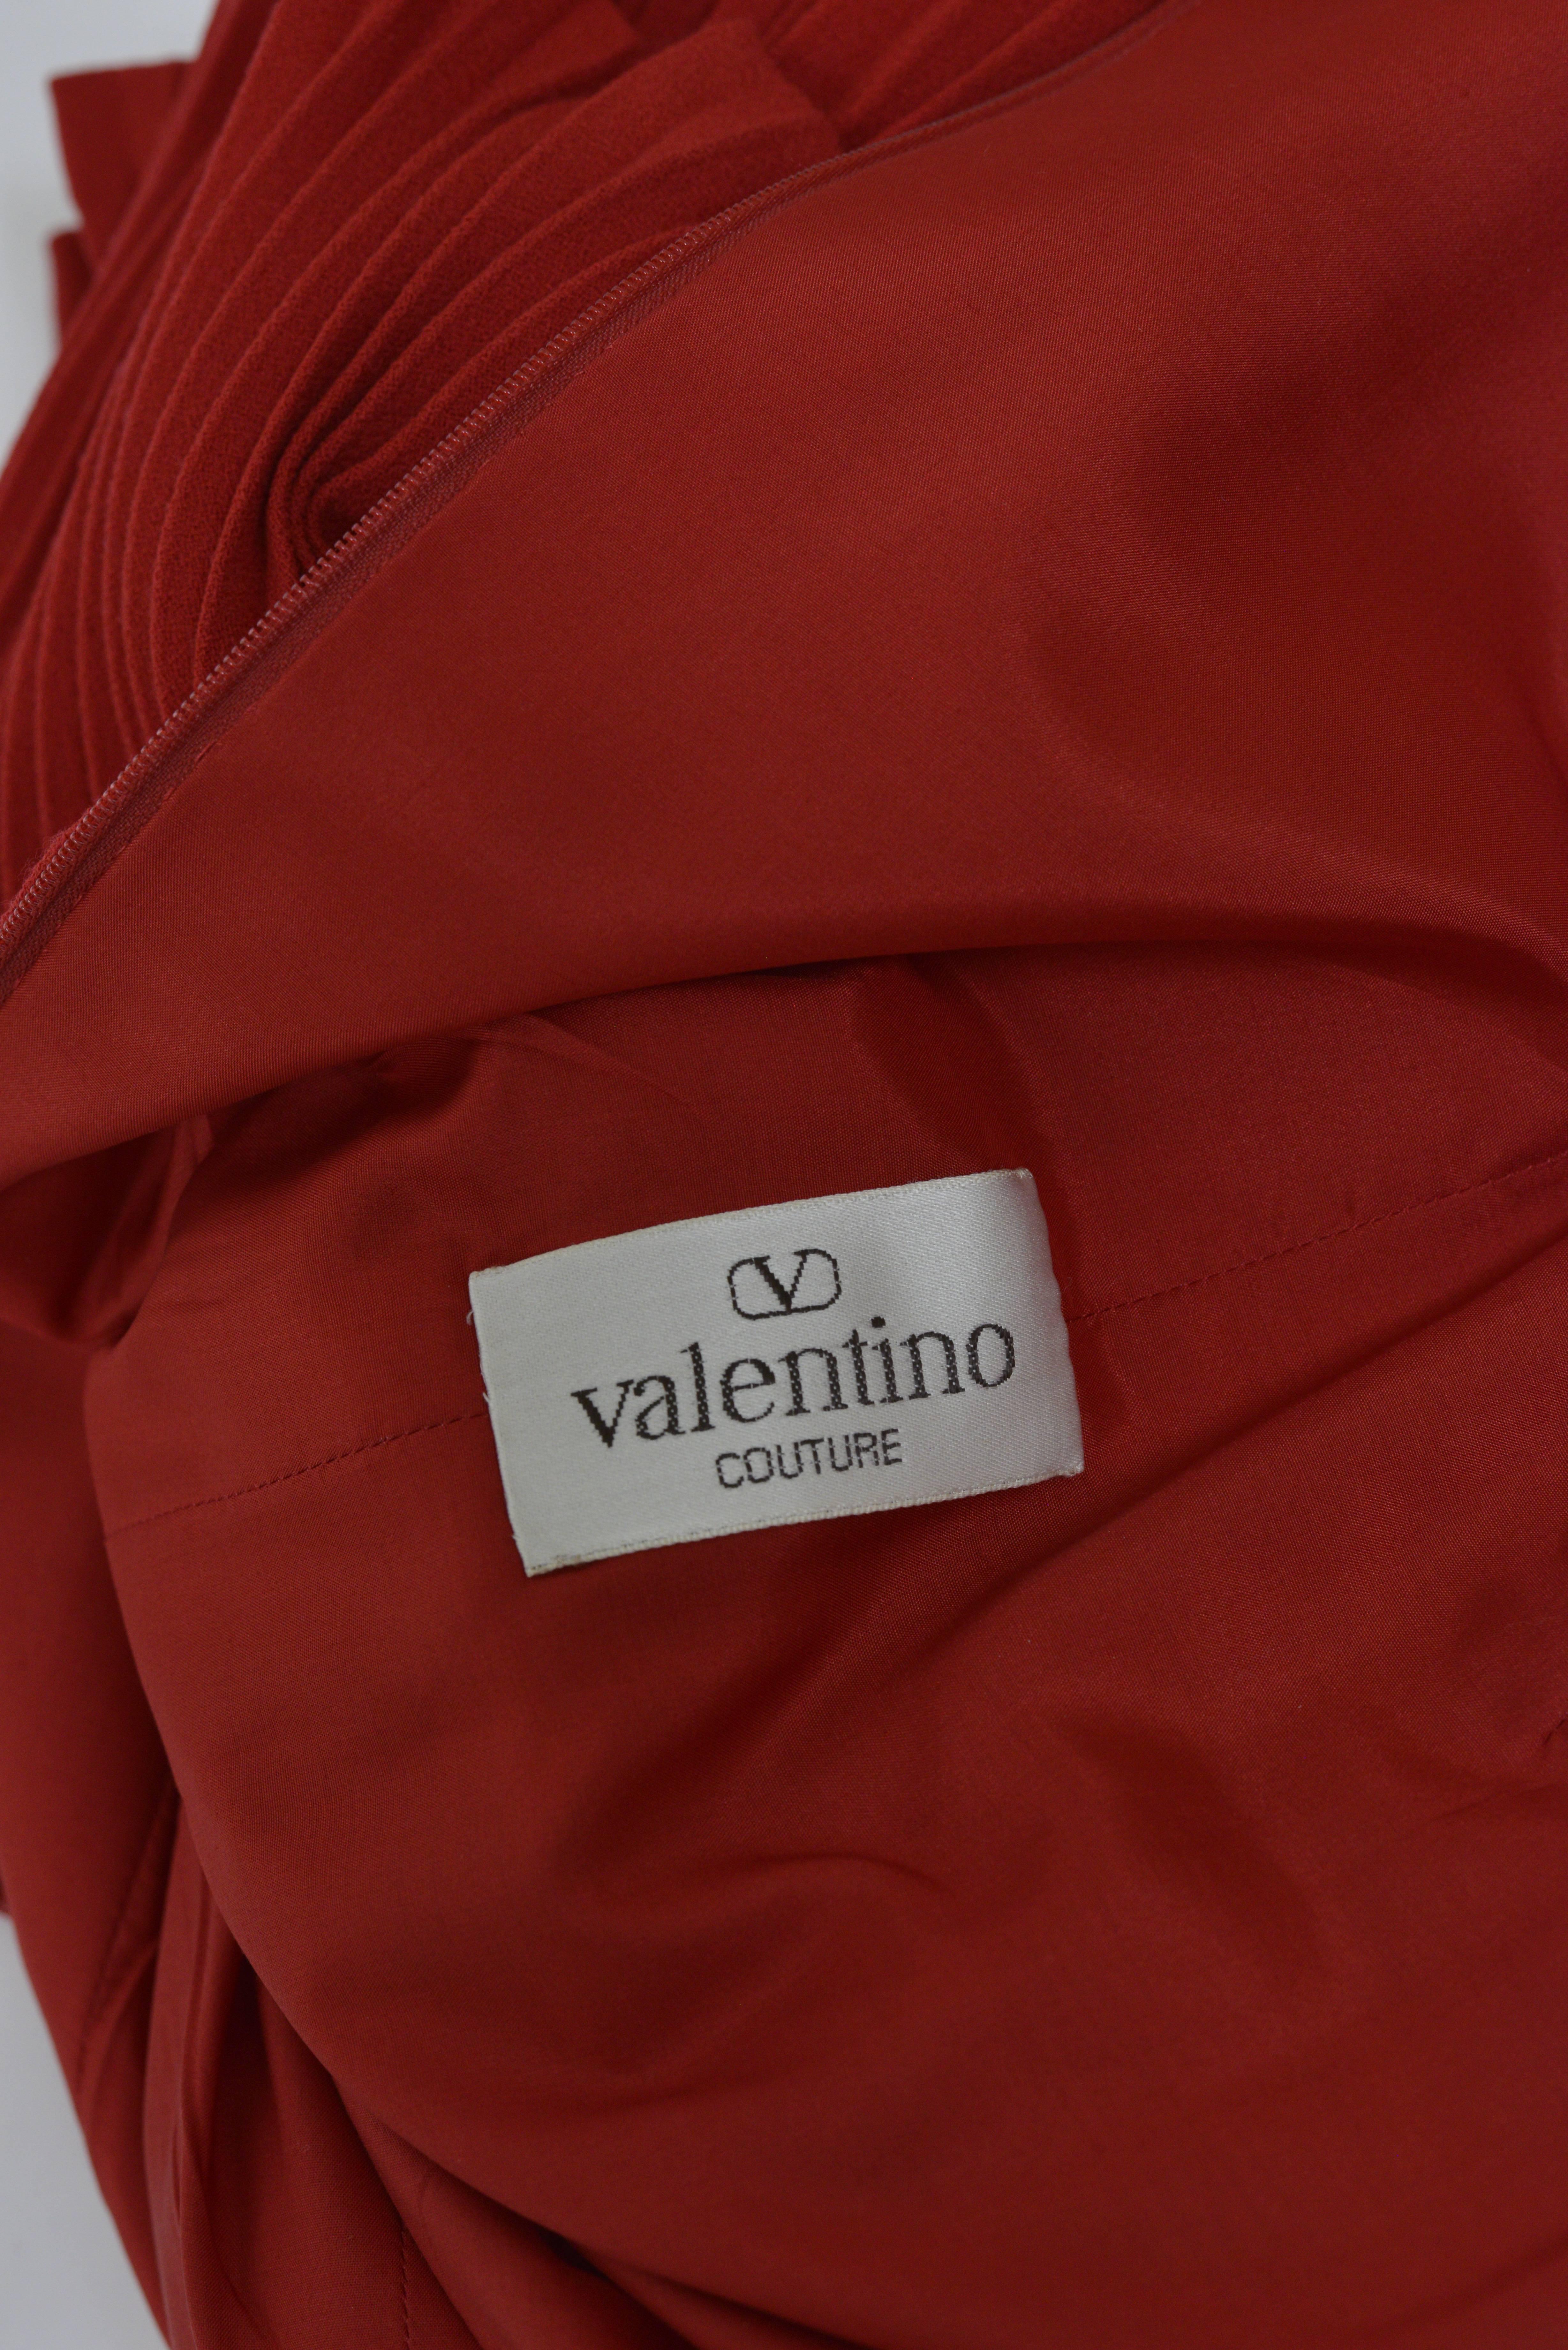 1990s VALENTINO COUTURE Red Pleateds Cocktail Dress For Sale 2